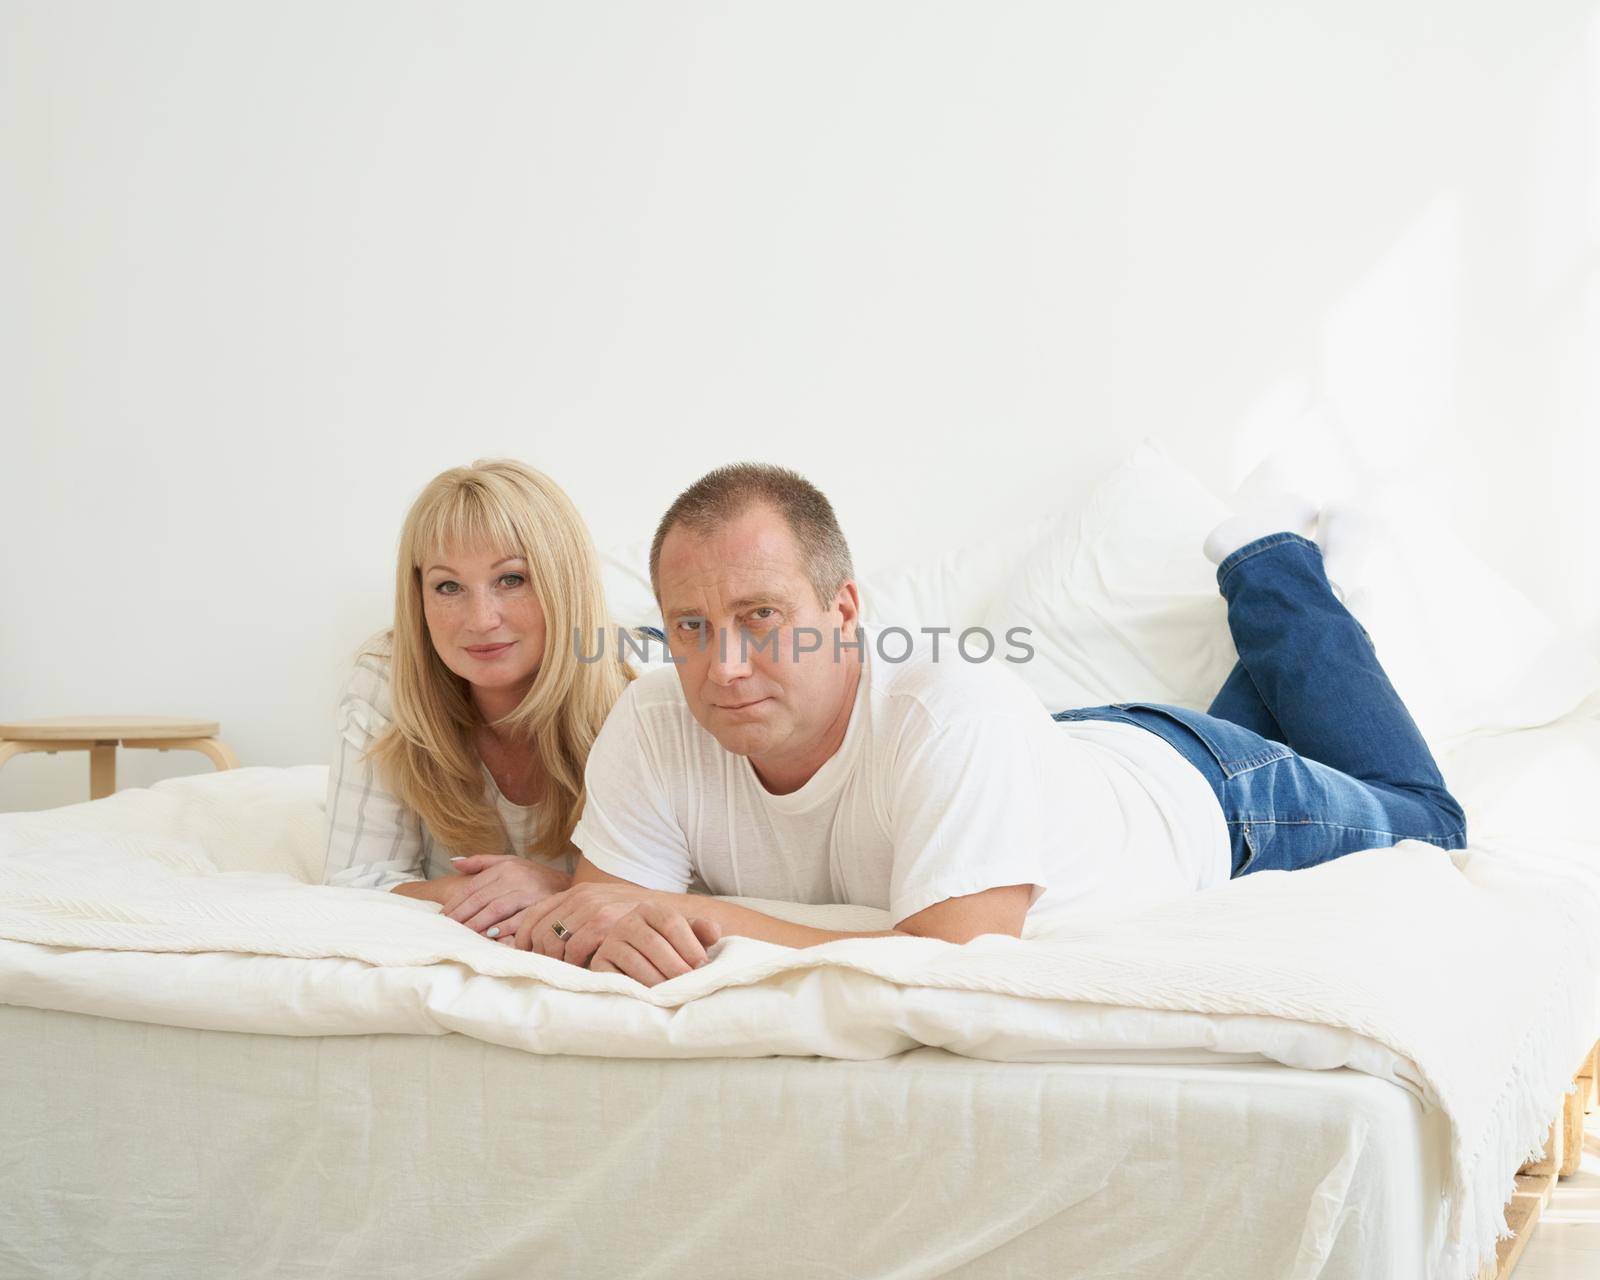 Portrait of mature couple in home interior on sofa. Handsome man and attractive middle age woman enjoying spending time together while lying in bed. People looking at camera